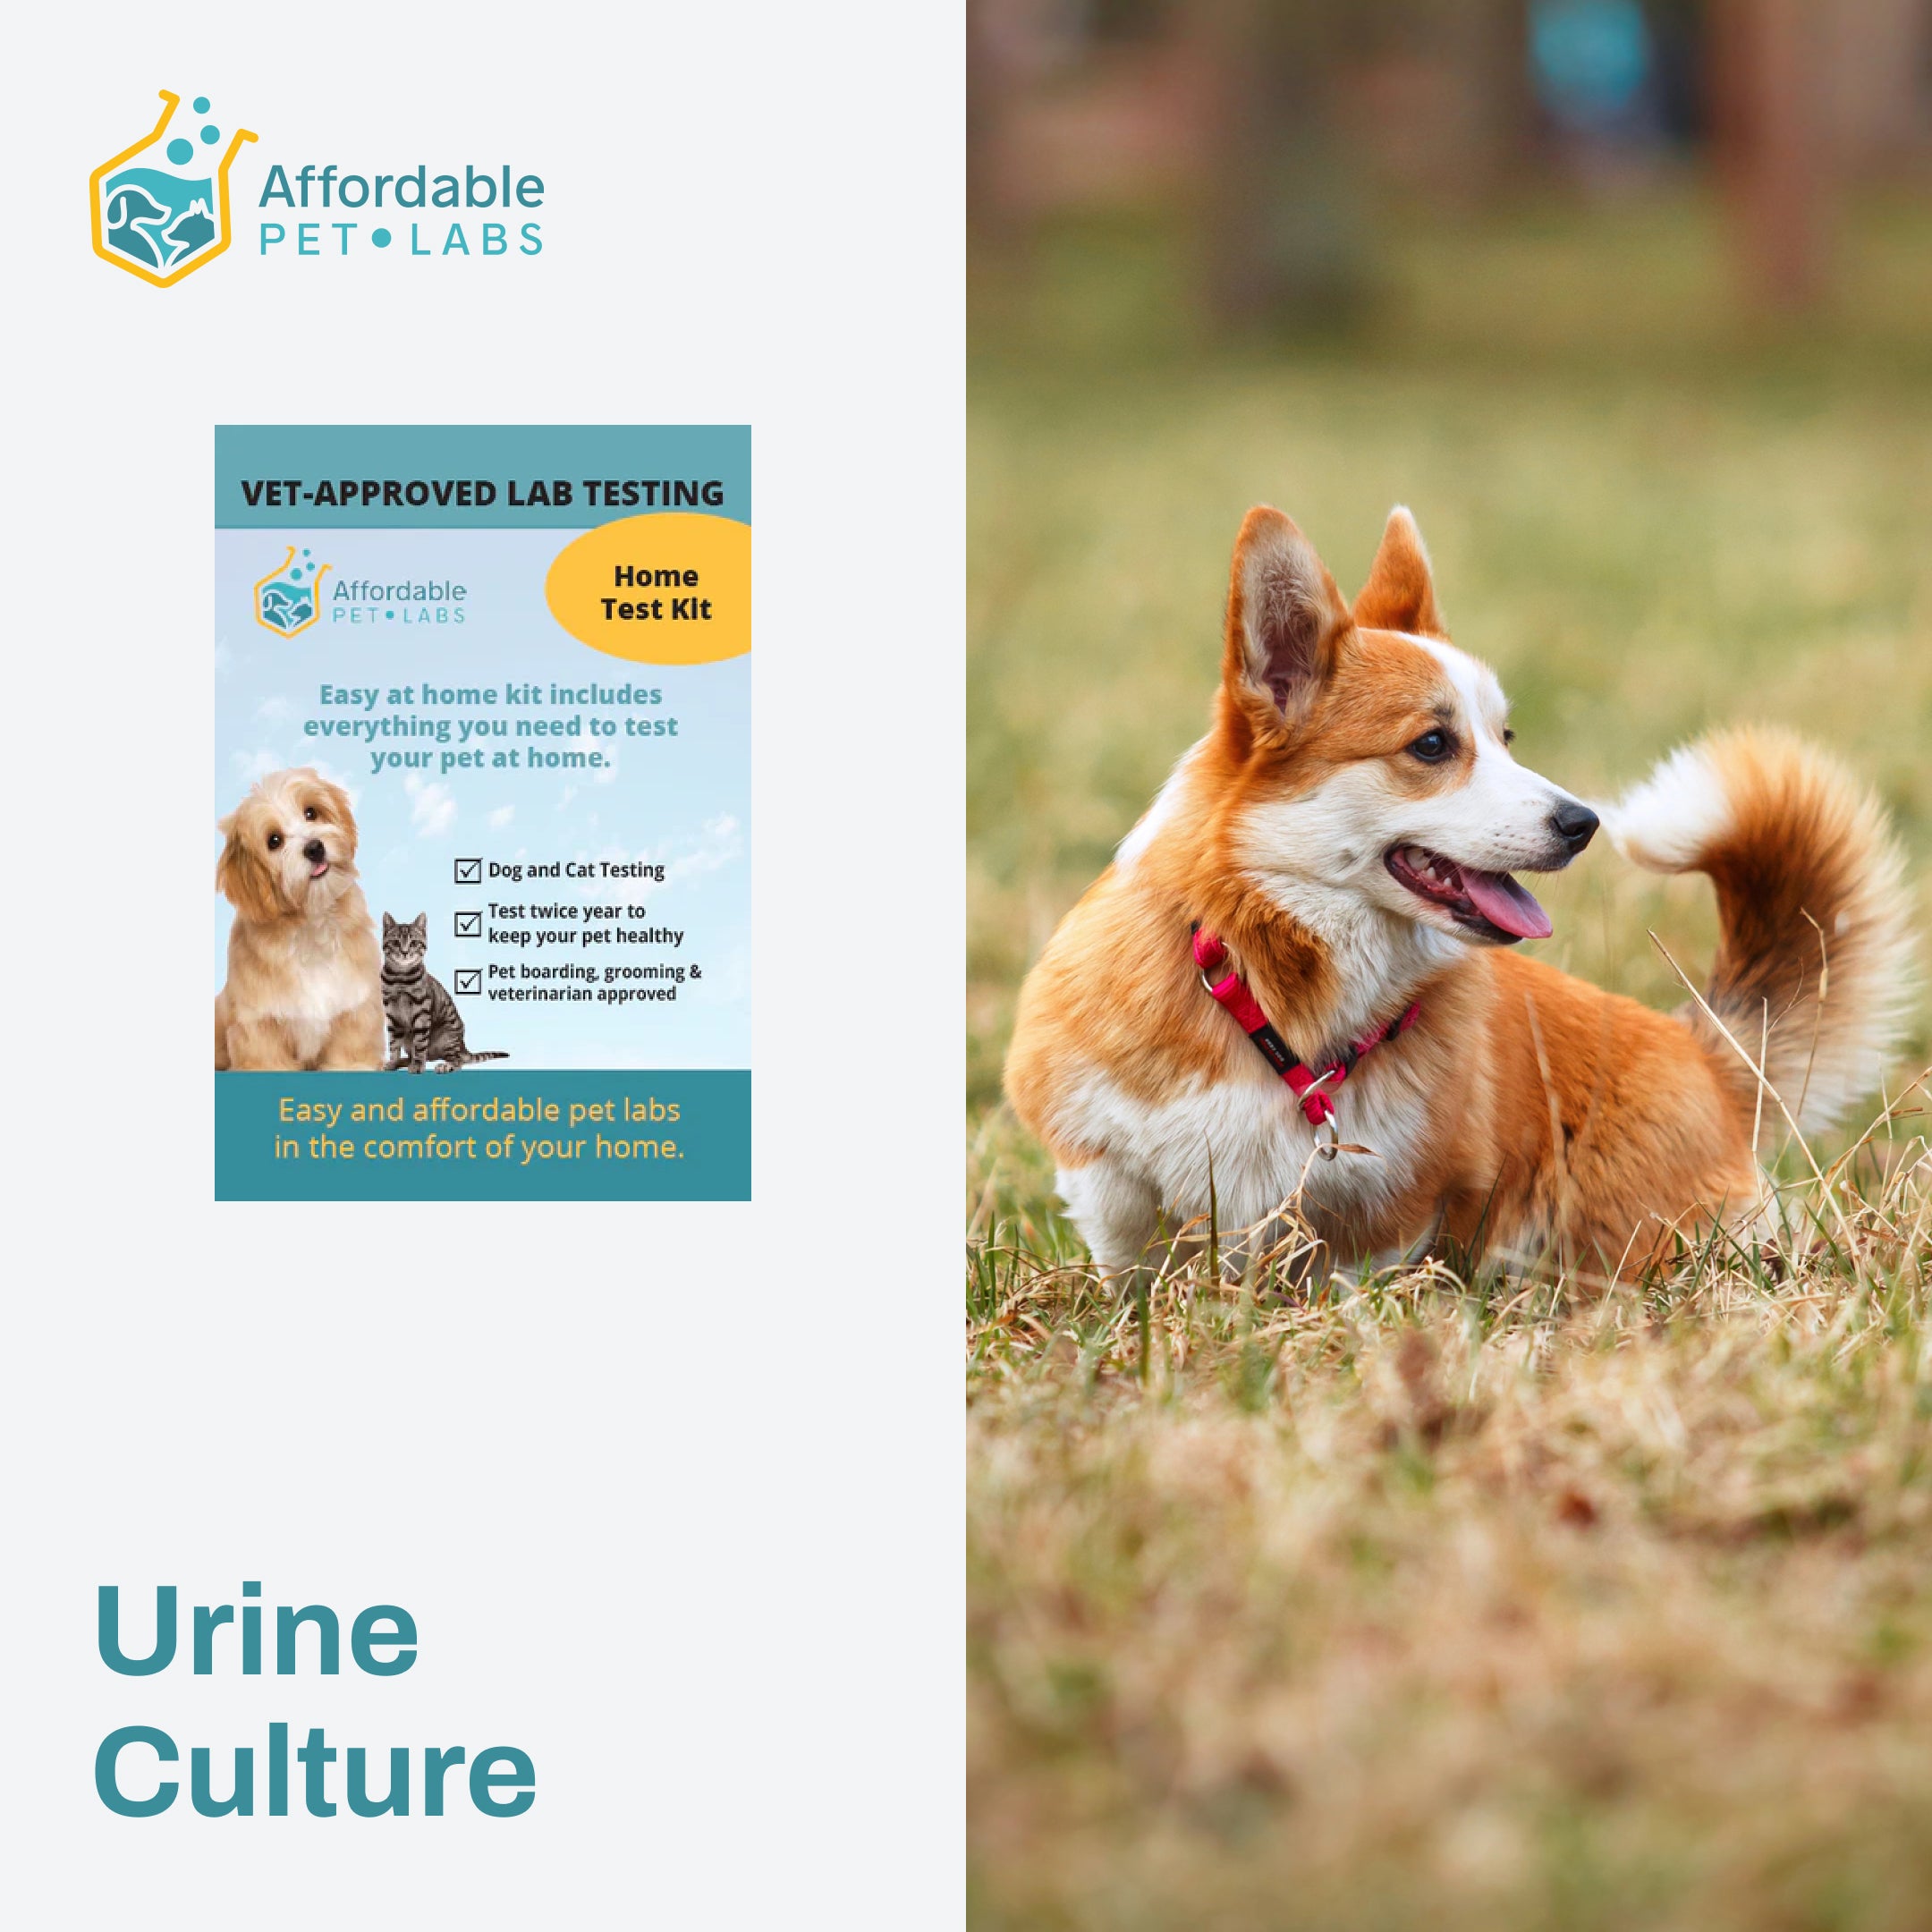 Urine Culture For Dogs